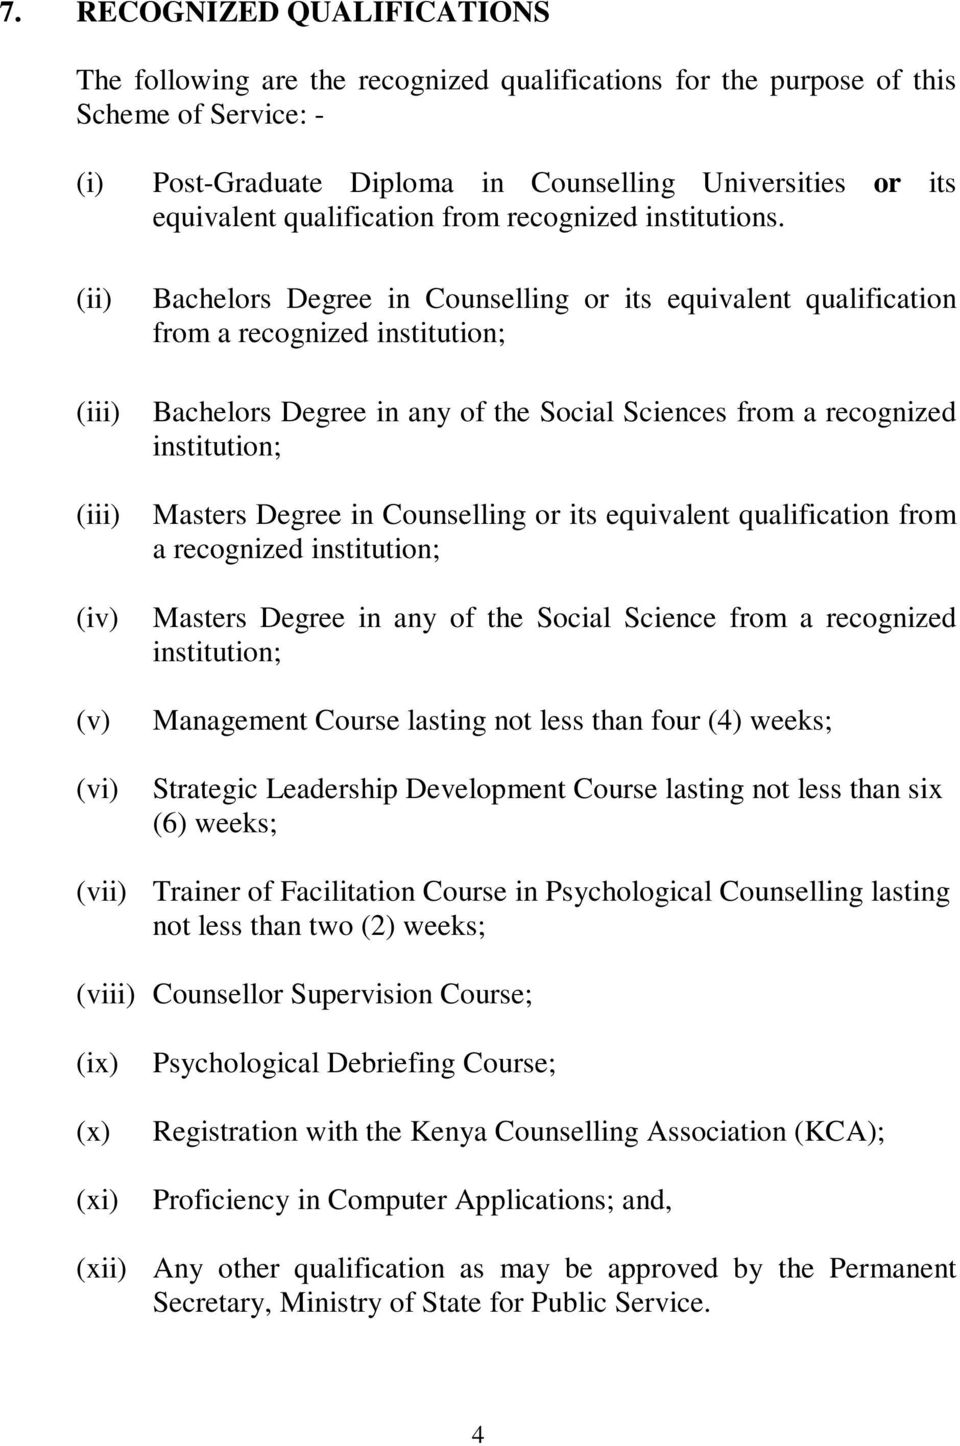 Bachelors Degree in Counselling or its equivalent qualification from a recognized institution; Bachelors Degree in any of the Social Sciences from a recognized institution; (iii) Masters Degree in